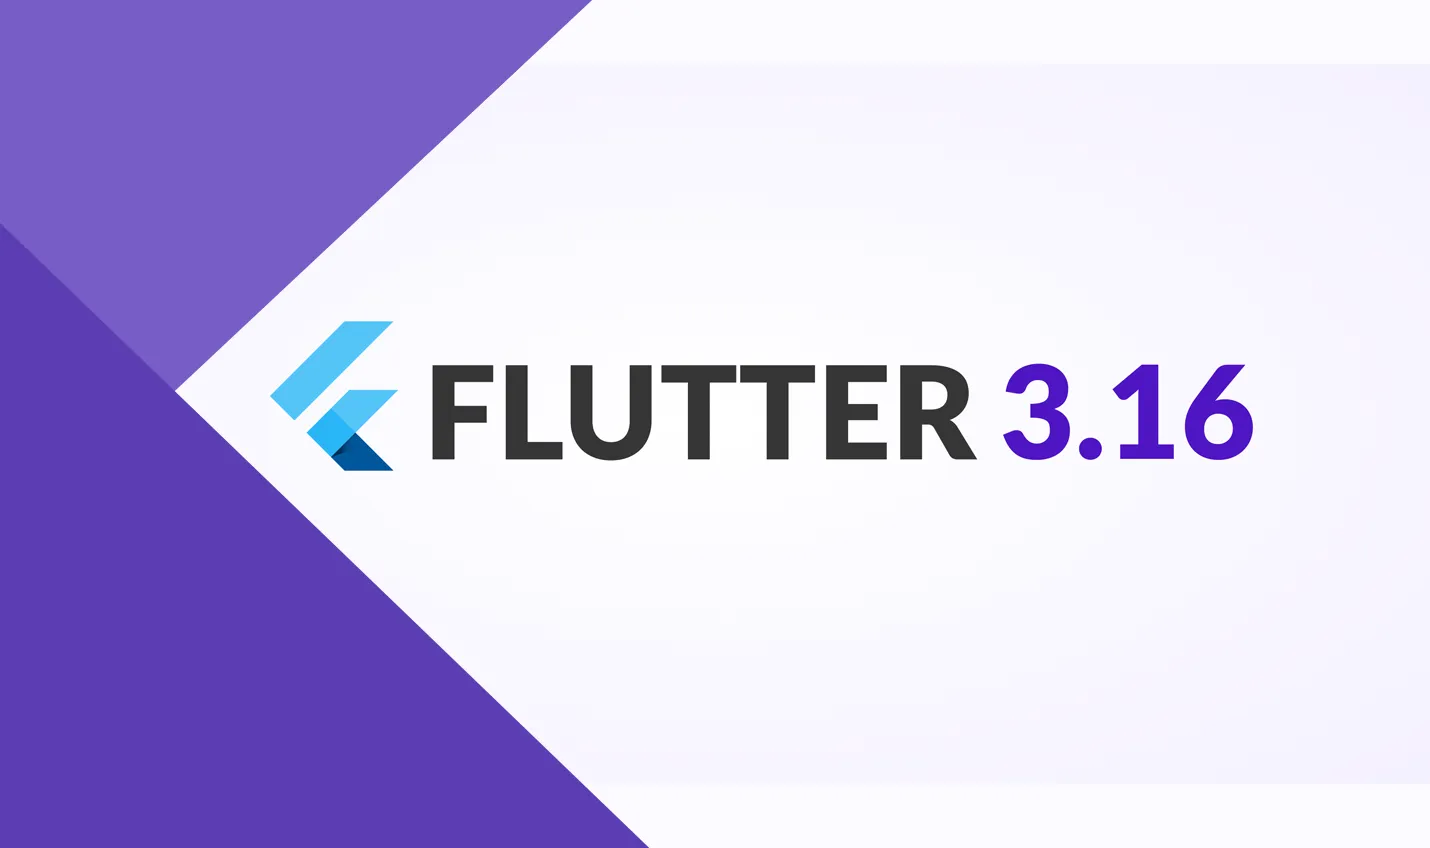 What's New in Flutter 3.16: Latest Updates & Features